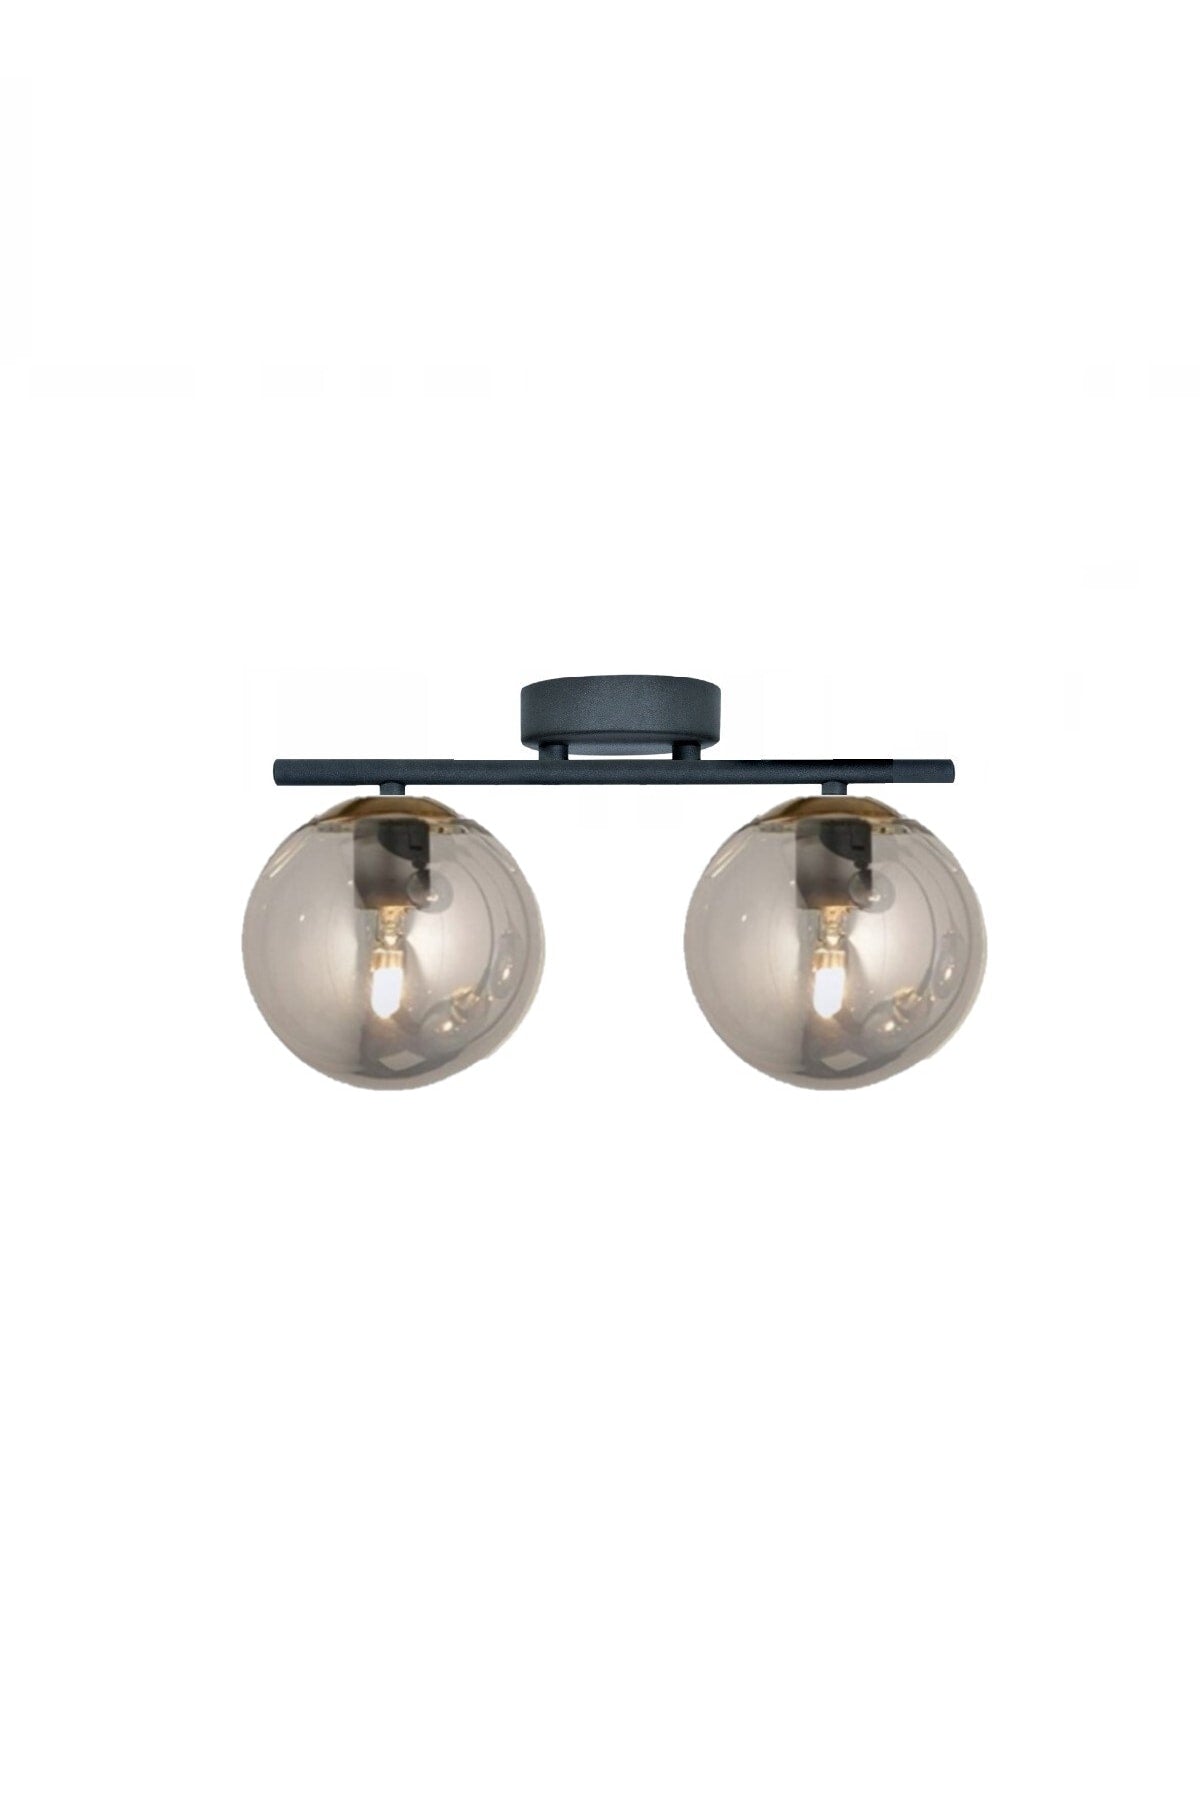 Black with Modern Smoked Glass Plafonyer Chandelier